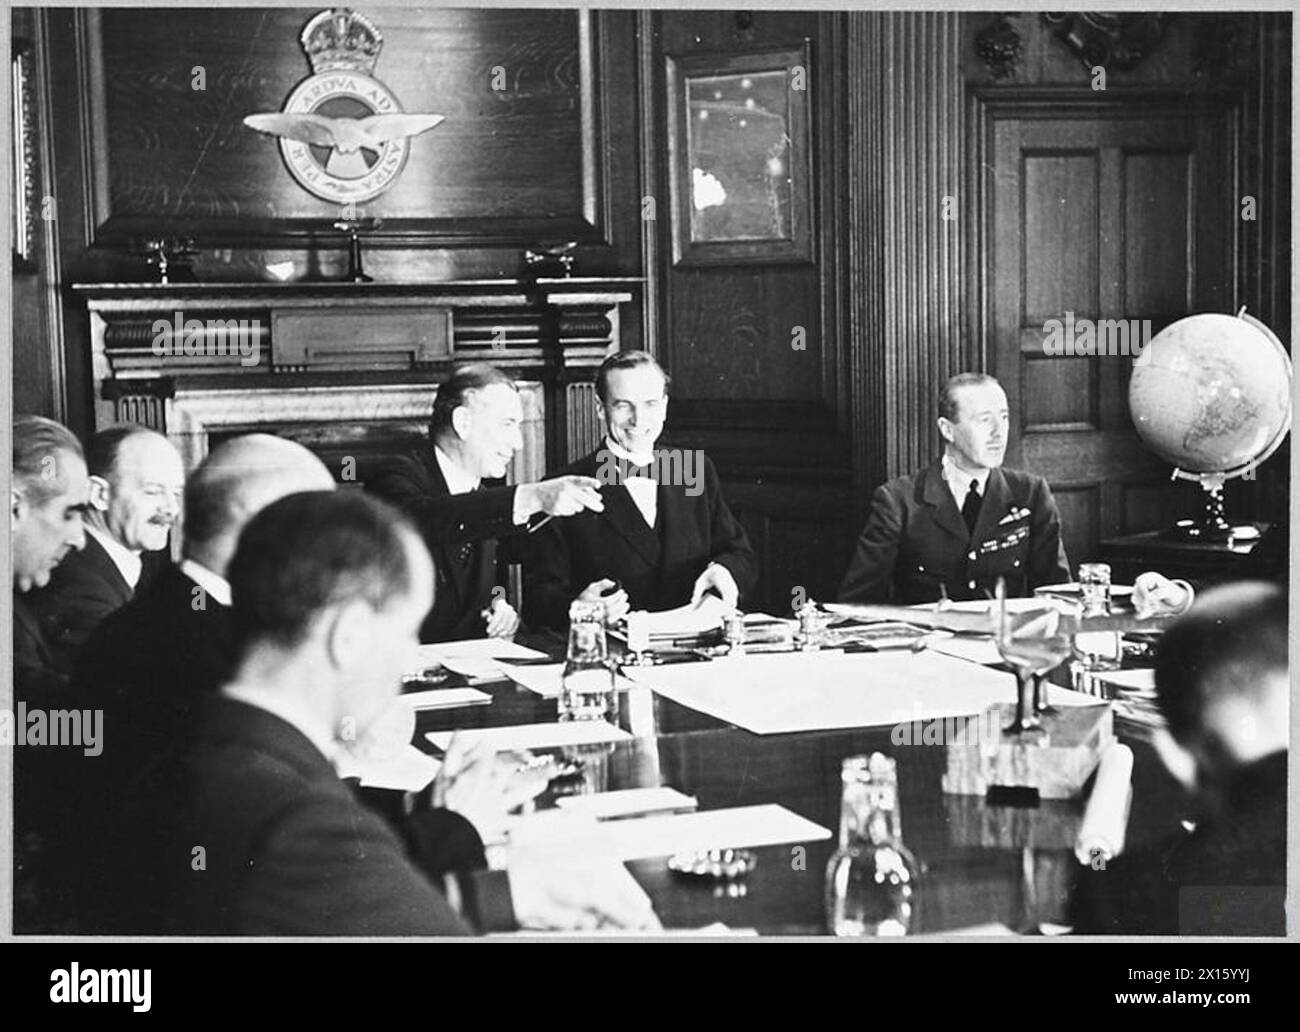 THE AIR COUNCIL - ISEE CH.966 for details of caption] Garrod, Howitt, Courtney, Gossage, Balfour, Sinclair, Newall, Street, Freeman Royal Air Force Foto Stock